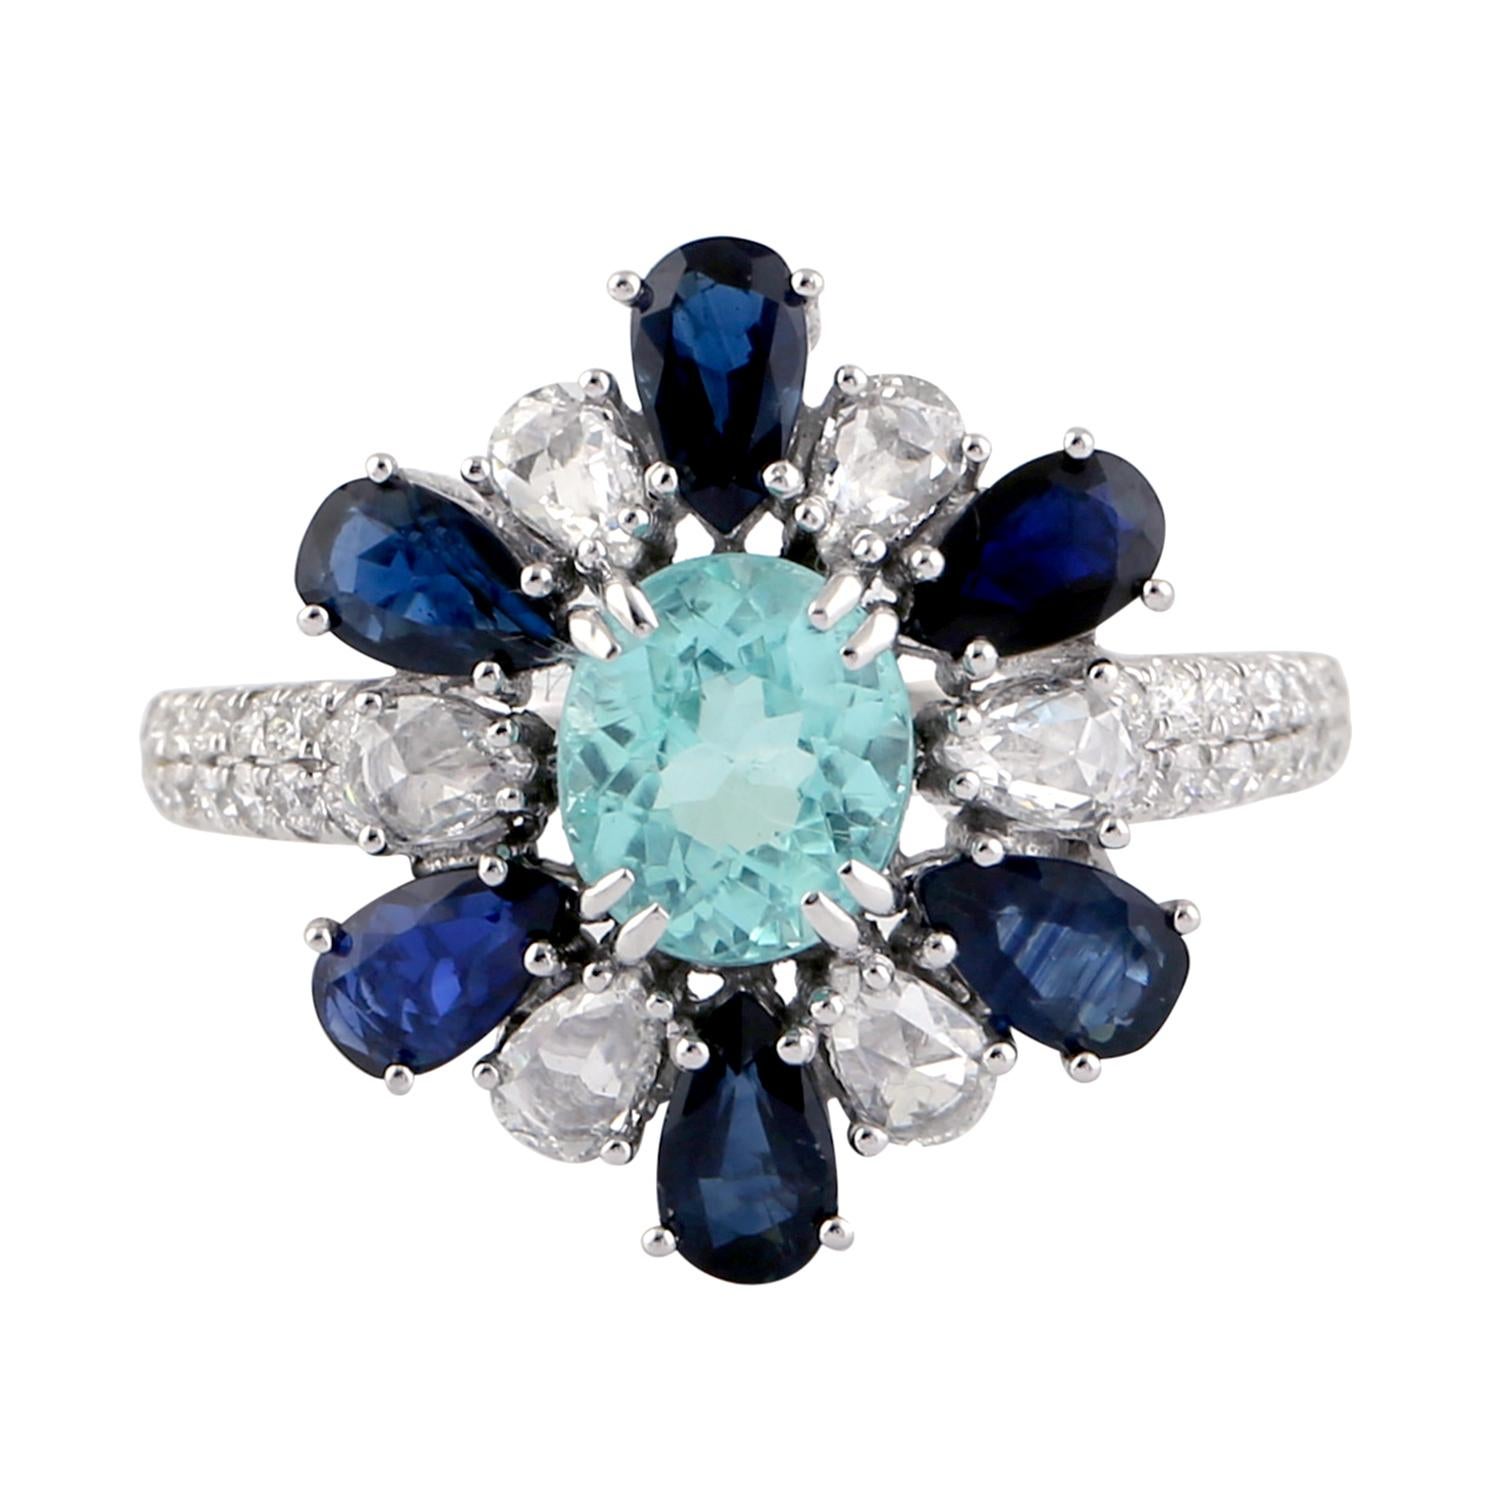 Beautiful Paraiba, Blue Sapphire and Diamond Ring set in 18K White Gold is a really unique. 

Ring Size: 6.5

Gold 18K: 3.56gms
Paraiba: 1.42cts
Blue Sapphire: 1.78cts
Diamond: .71cts